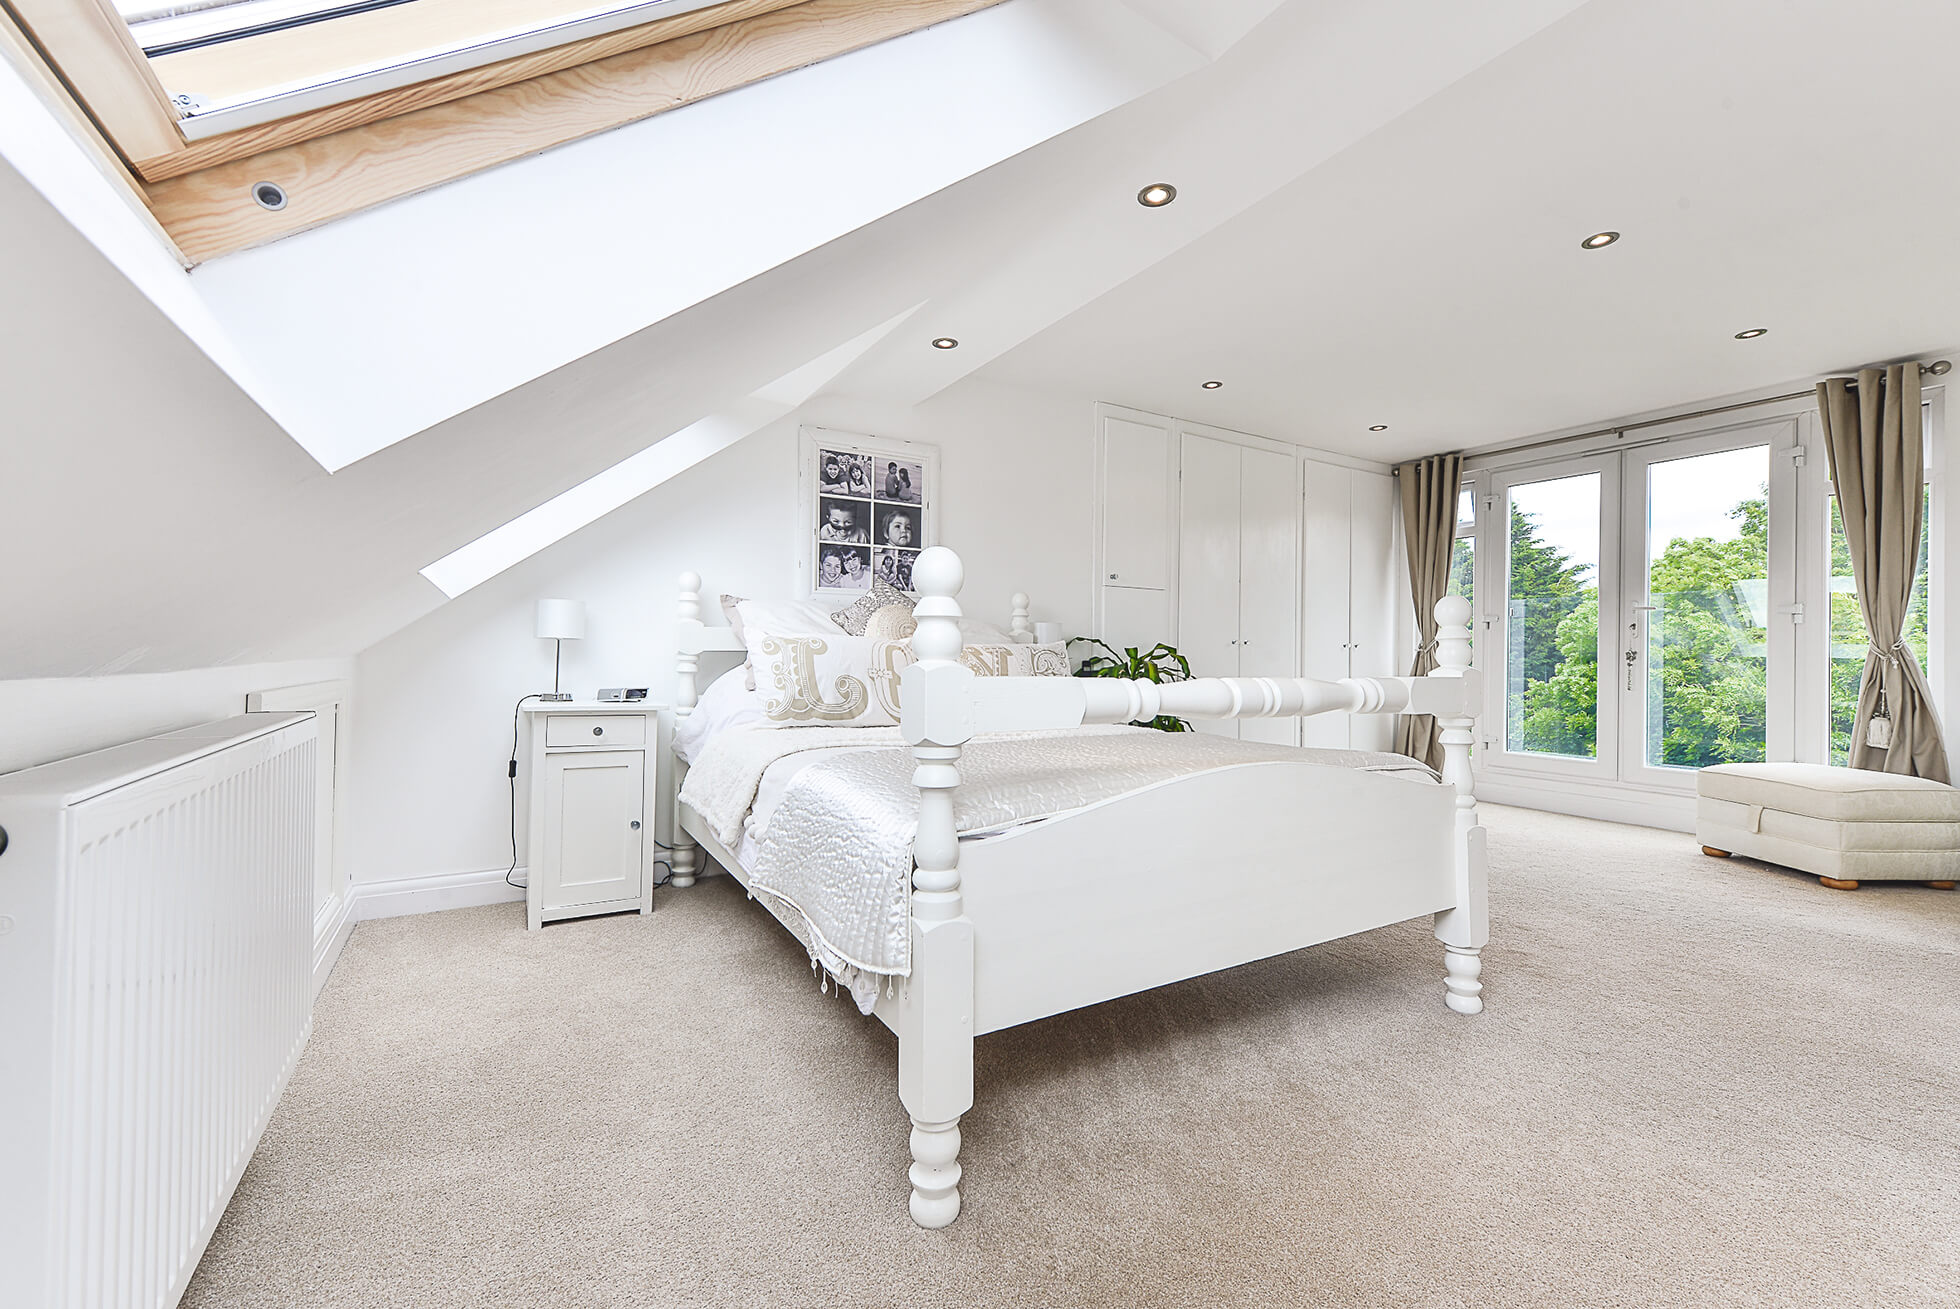 Do you have a question about converting your Loft in Radlett? Here are the most popular questions asked by our clients.